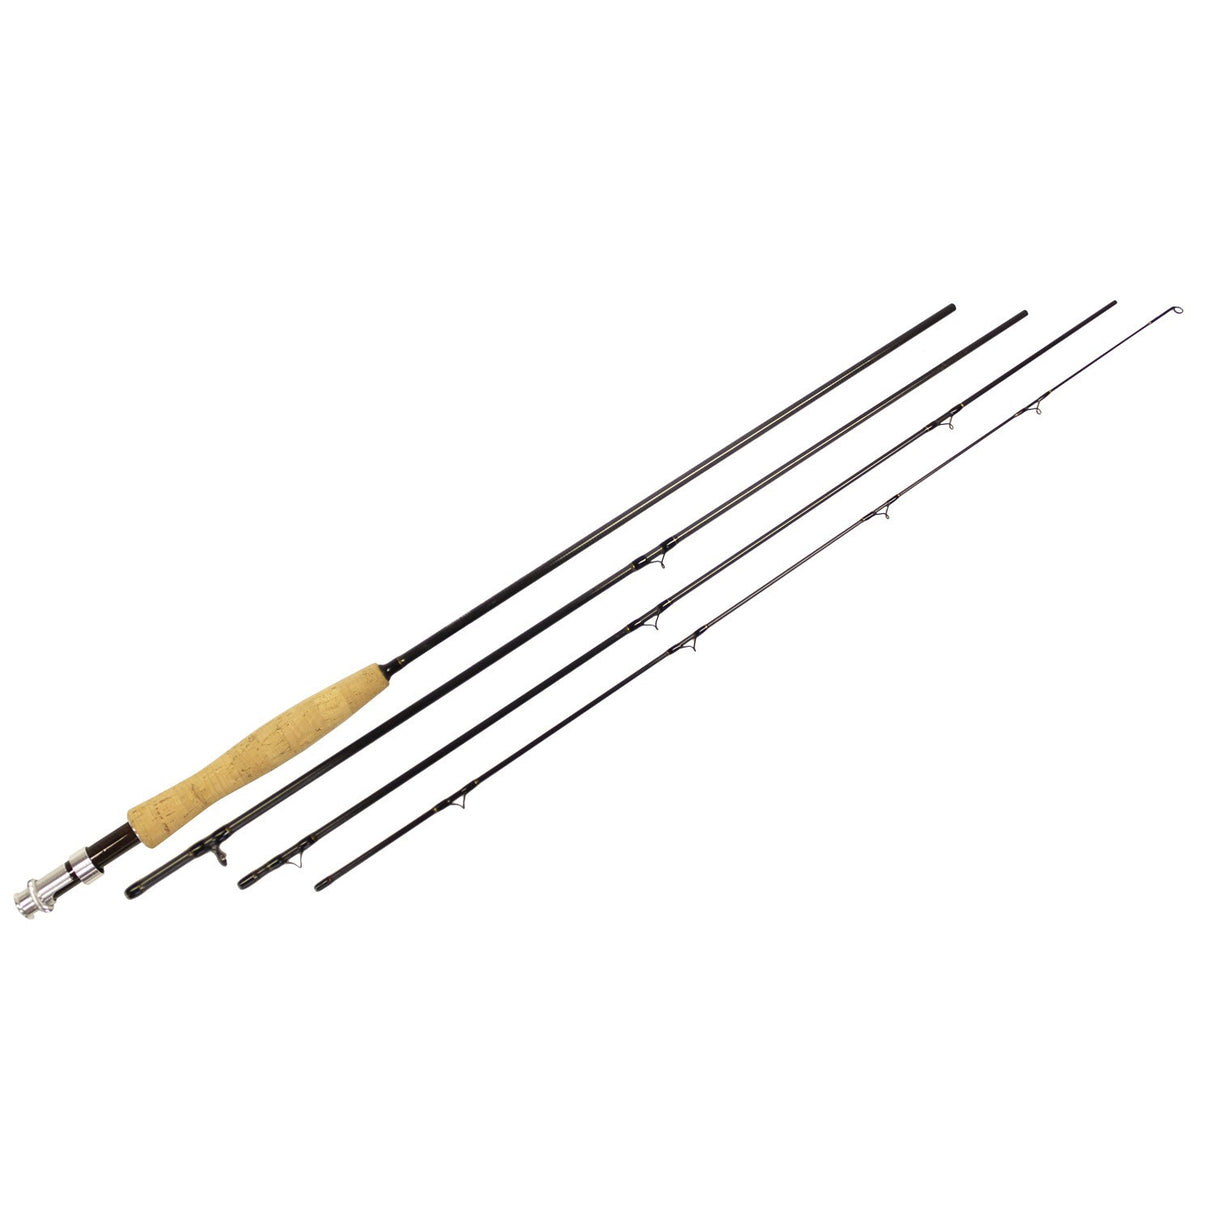 SHU-FLY 9'0" 4-PIECE FLY ROD FOR 5 WEIGHT